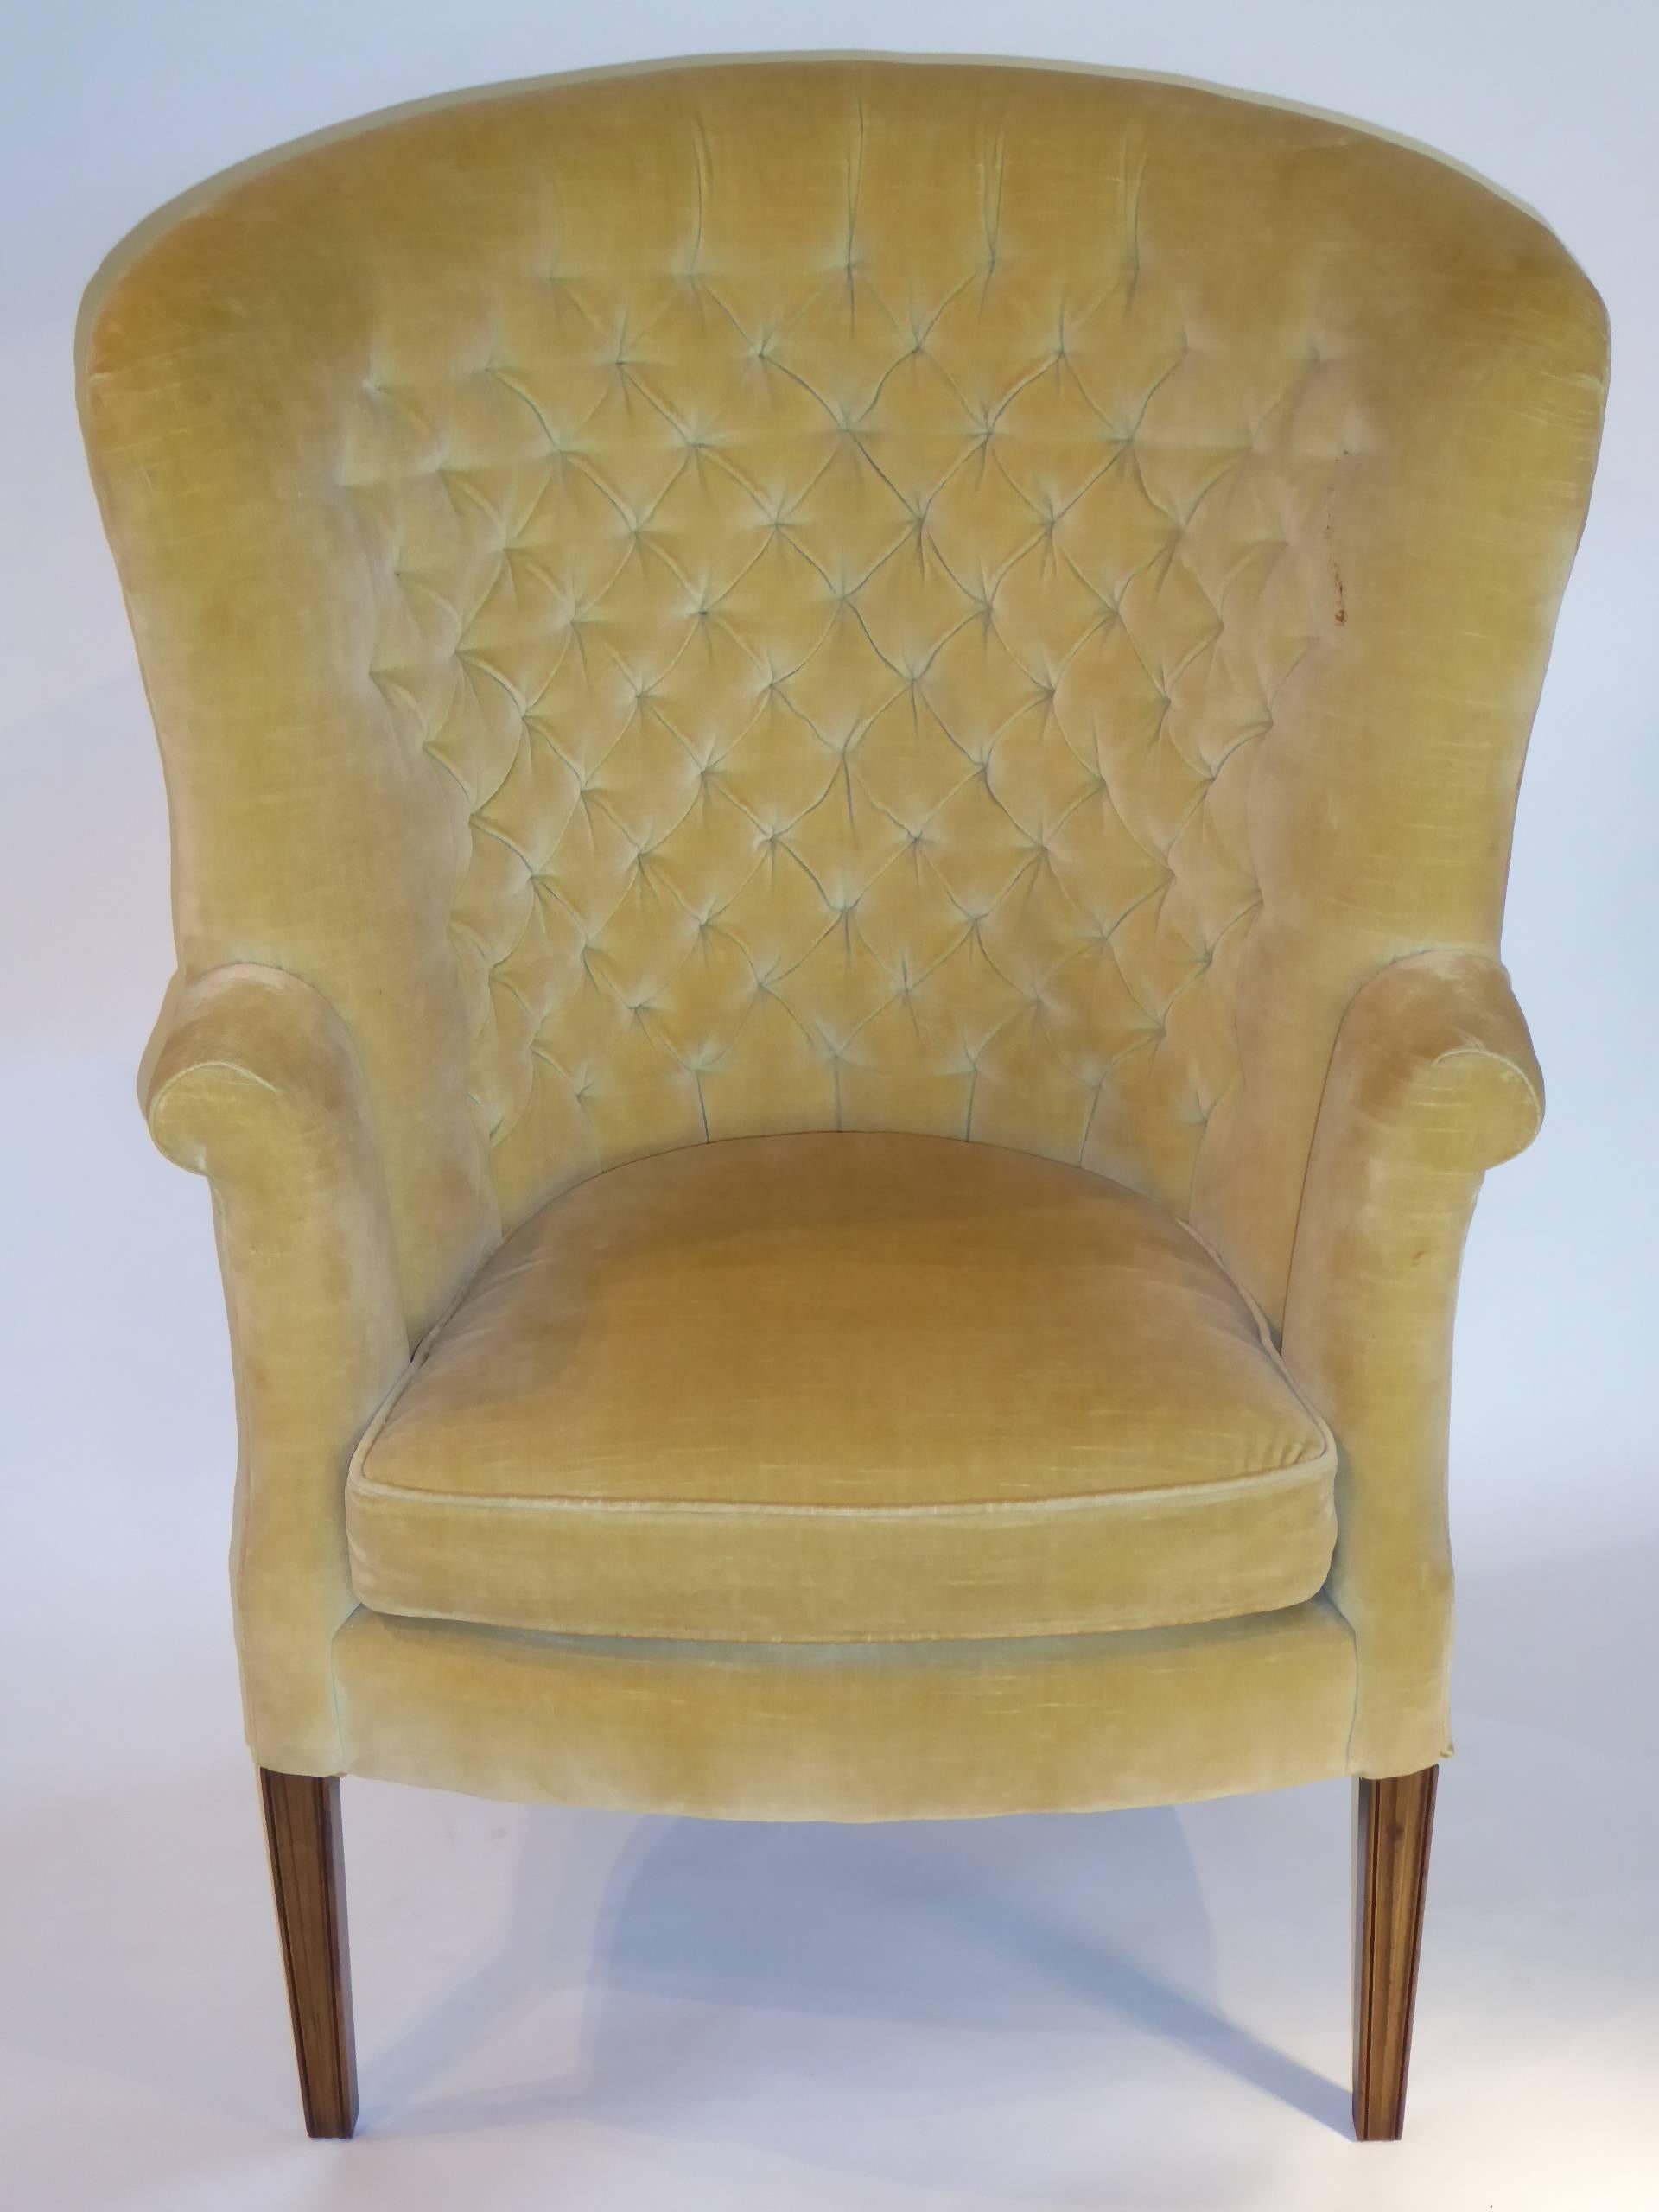 Wonderful scale, high back and squat tufted velvet wingback chair, a 1950s creation from century. Original velvet fabric with one pictured stain on a shoulder. New fabric suggested. Straight and tapered walnut legs. Measurements: 46